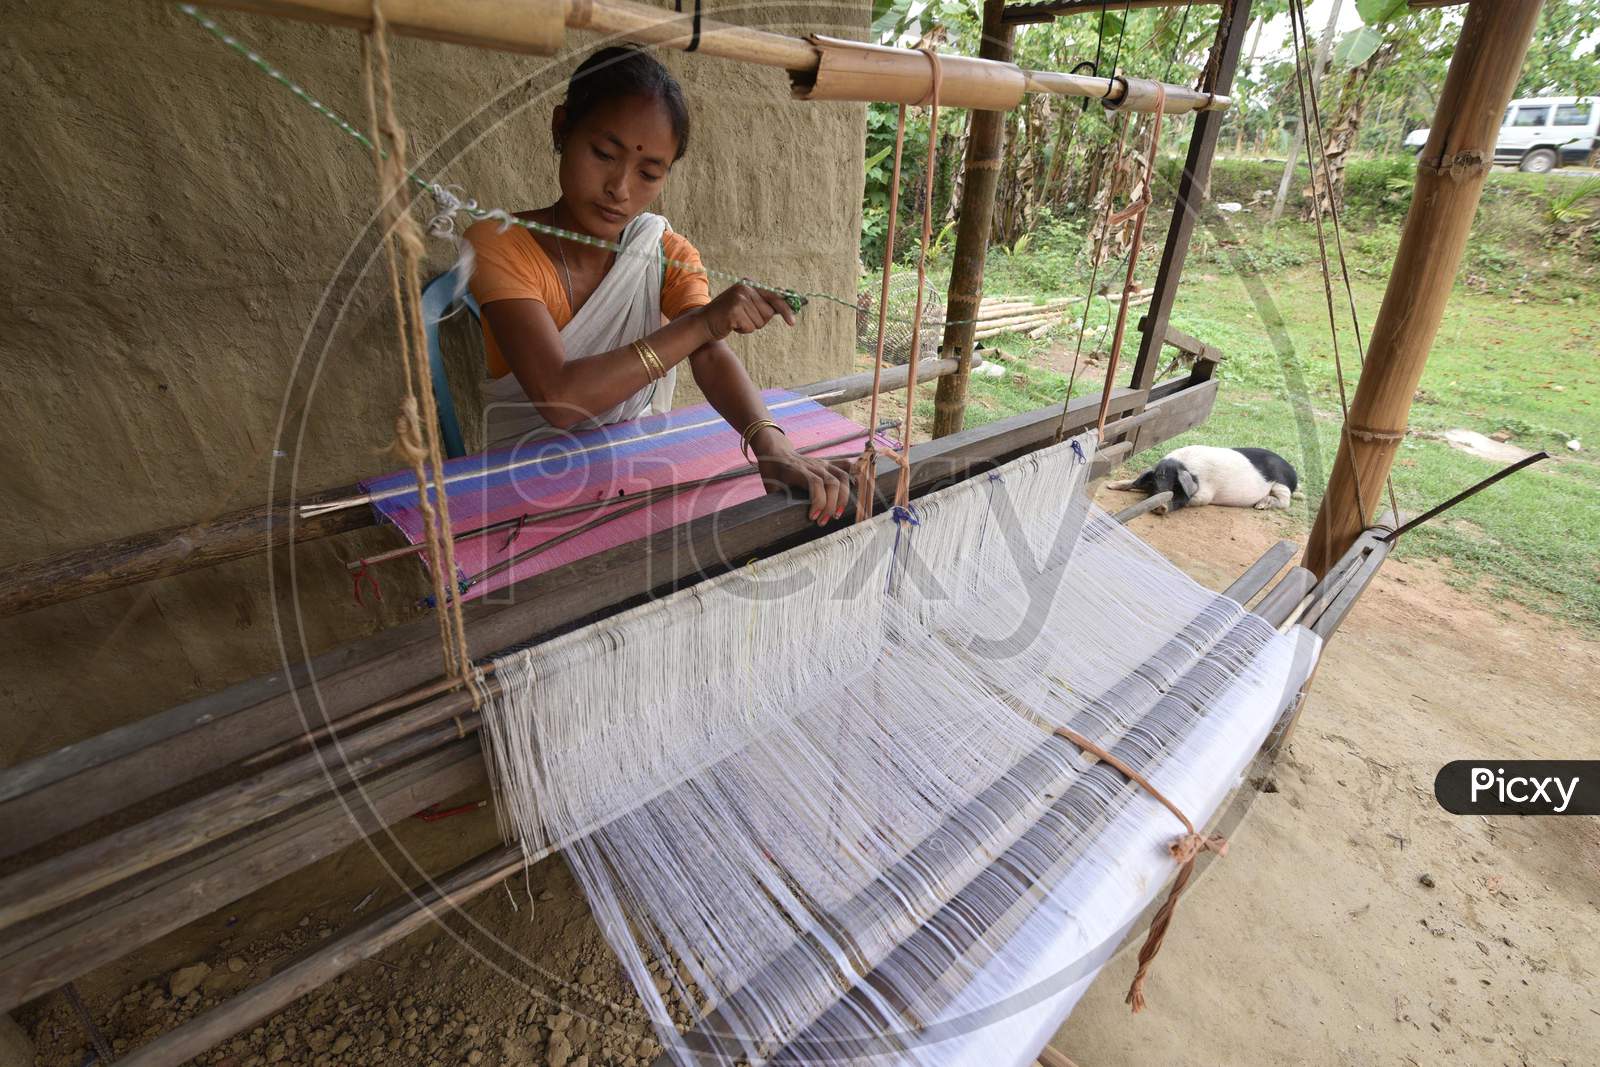 Assamese woman weaves cloth on a loom ahead of Rongali Bihu festival in the Morigaon district, in the northeastern state of Assam